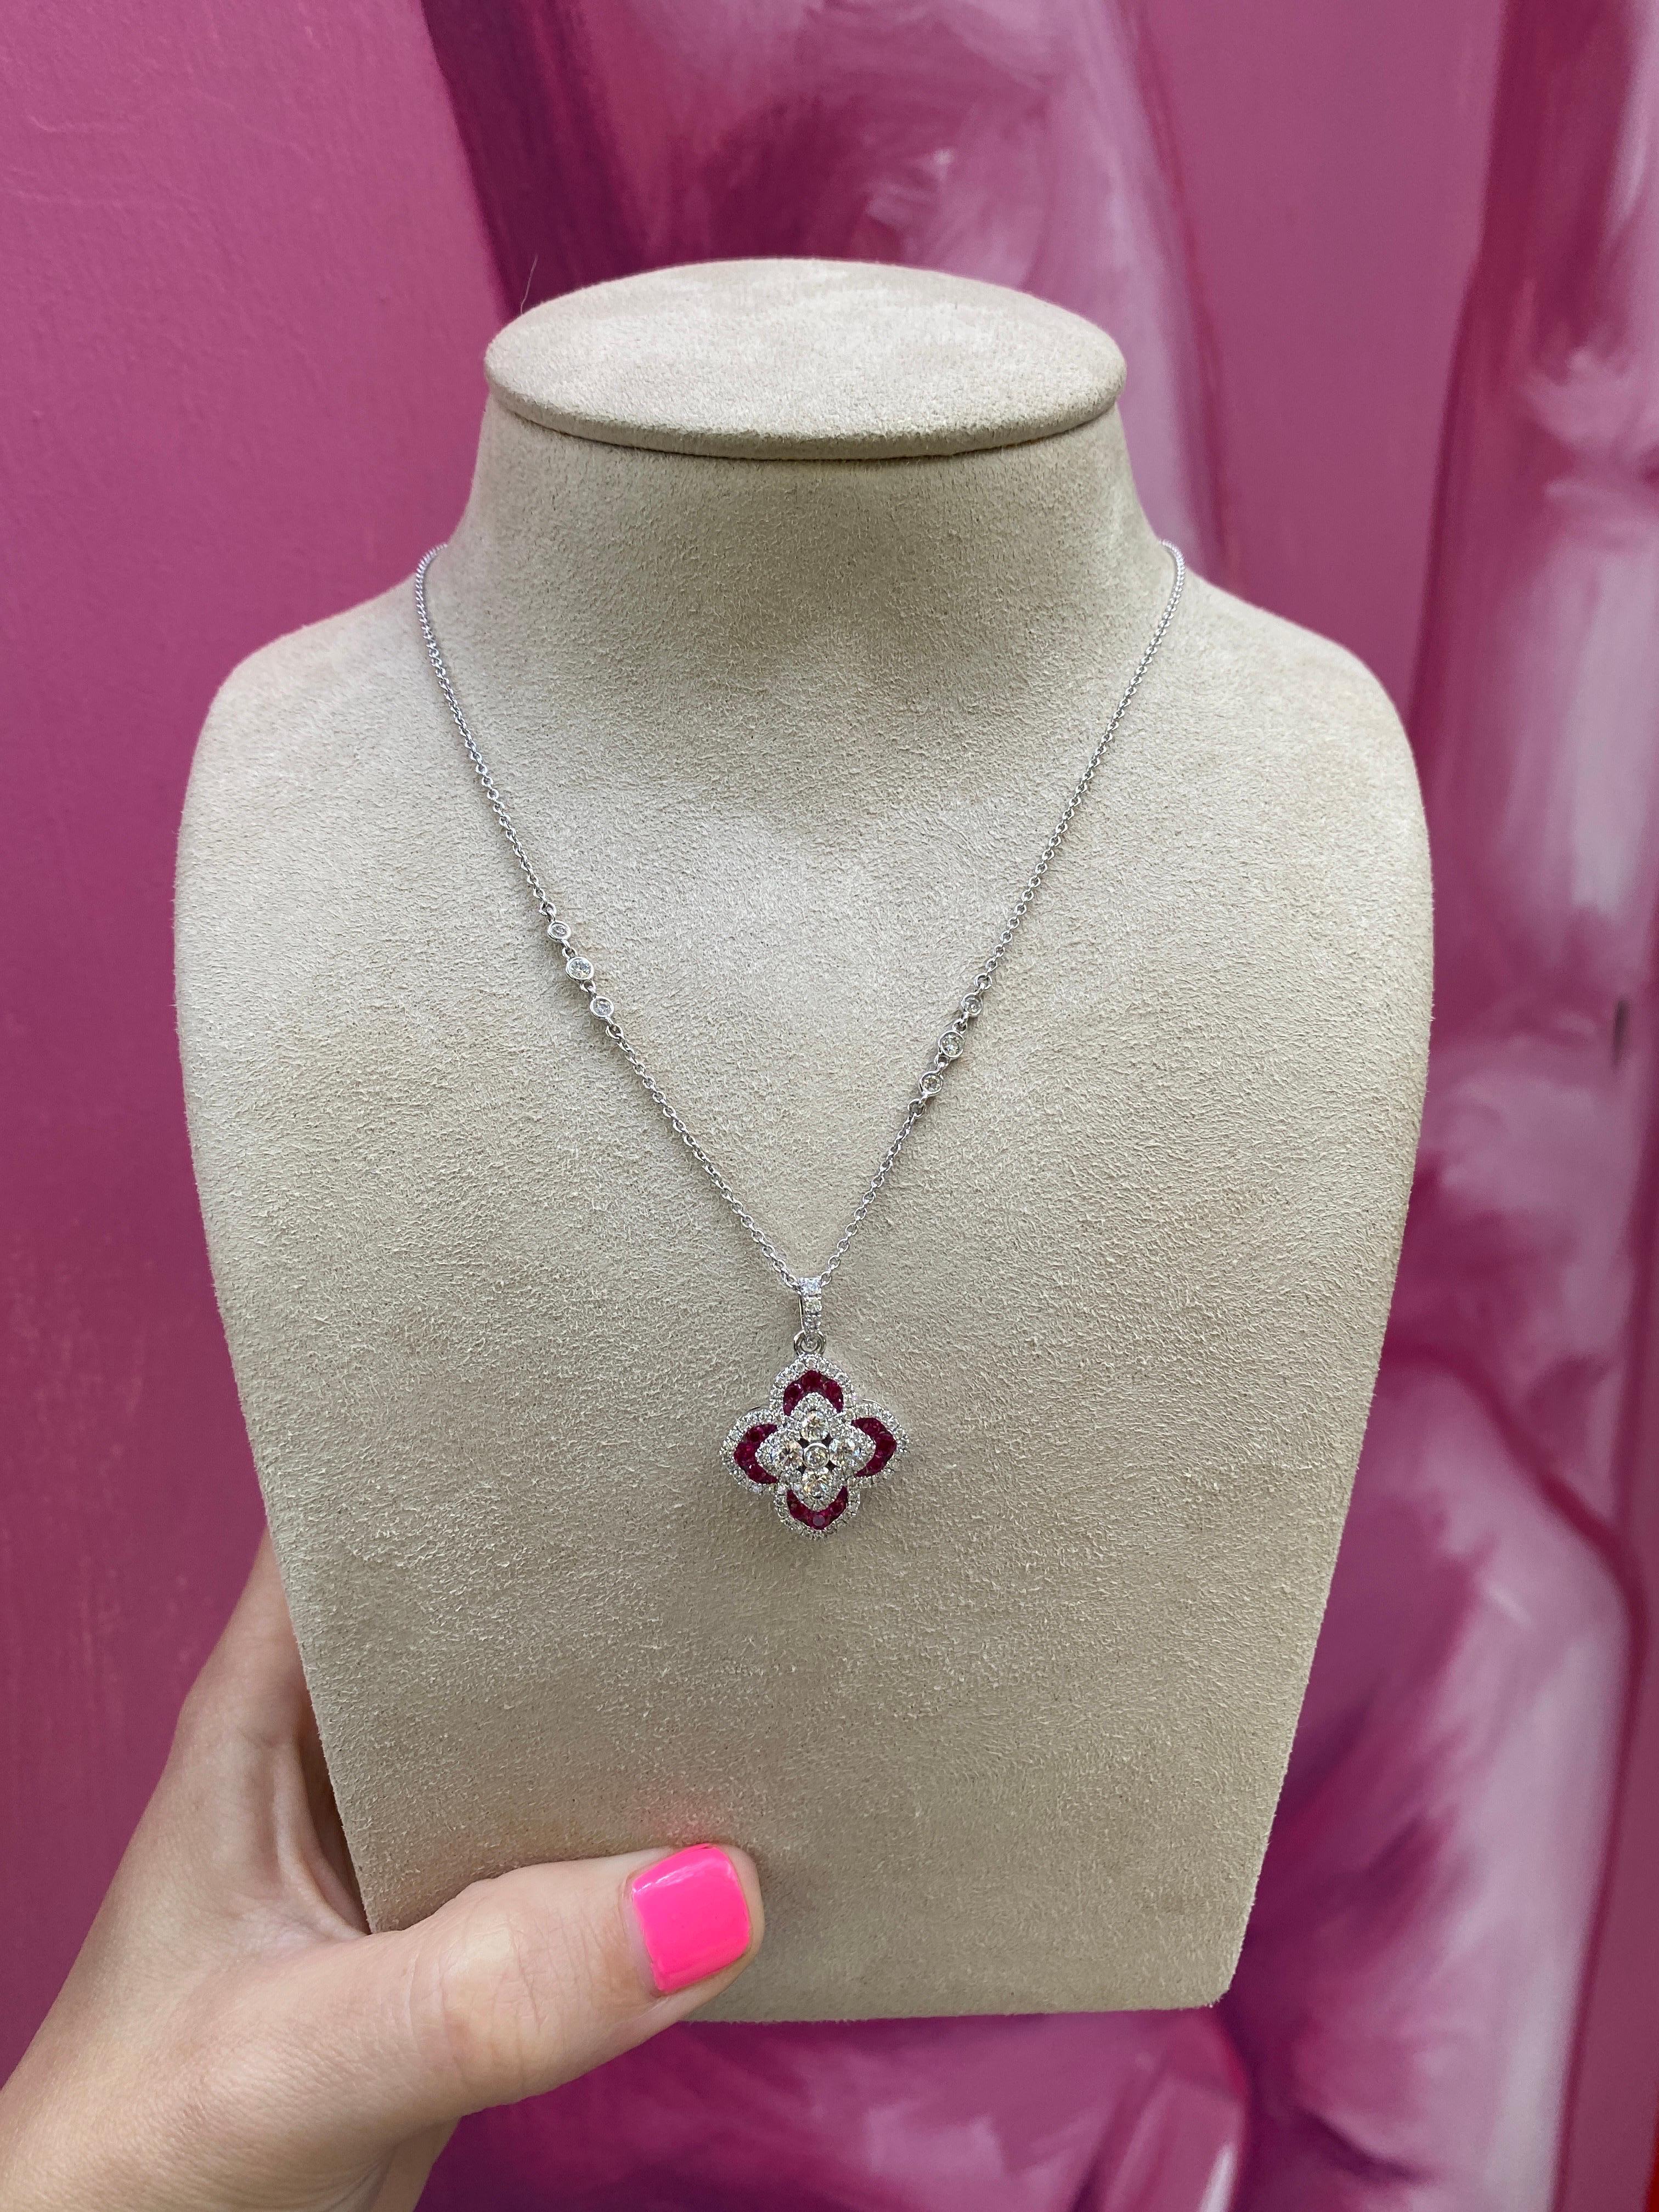 Charles Krypell 0.93ctw Round Diamond & 0.61ctw Round Ruby Pendant Necklace For Sale 8